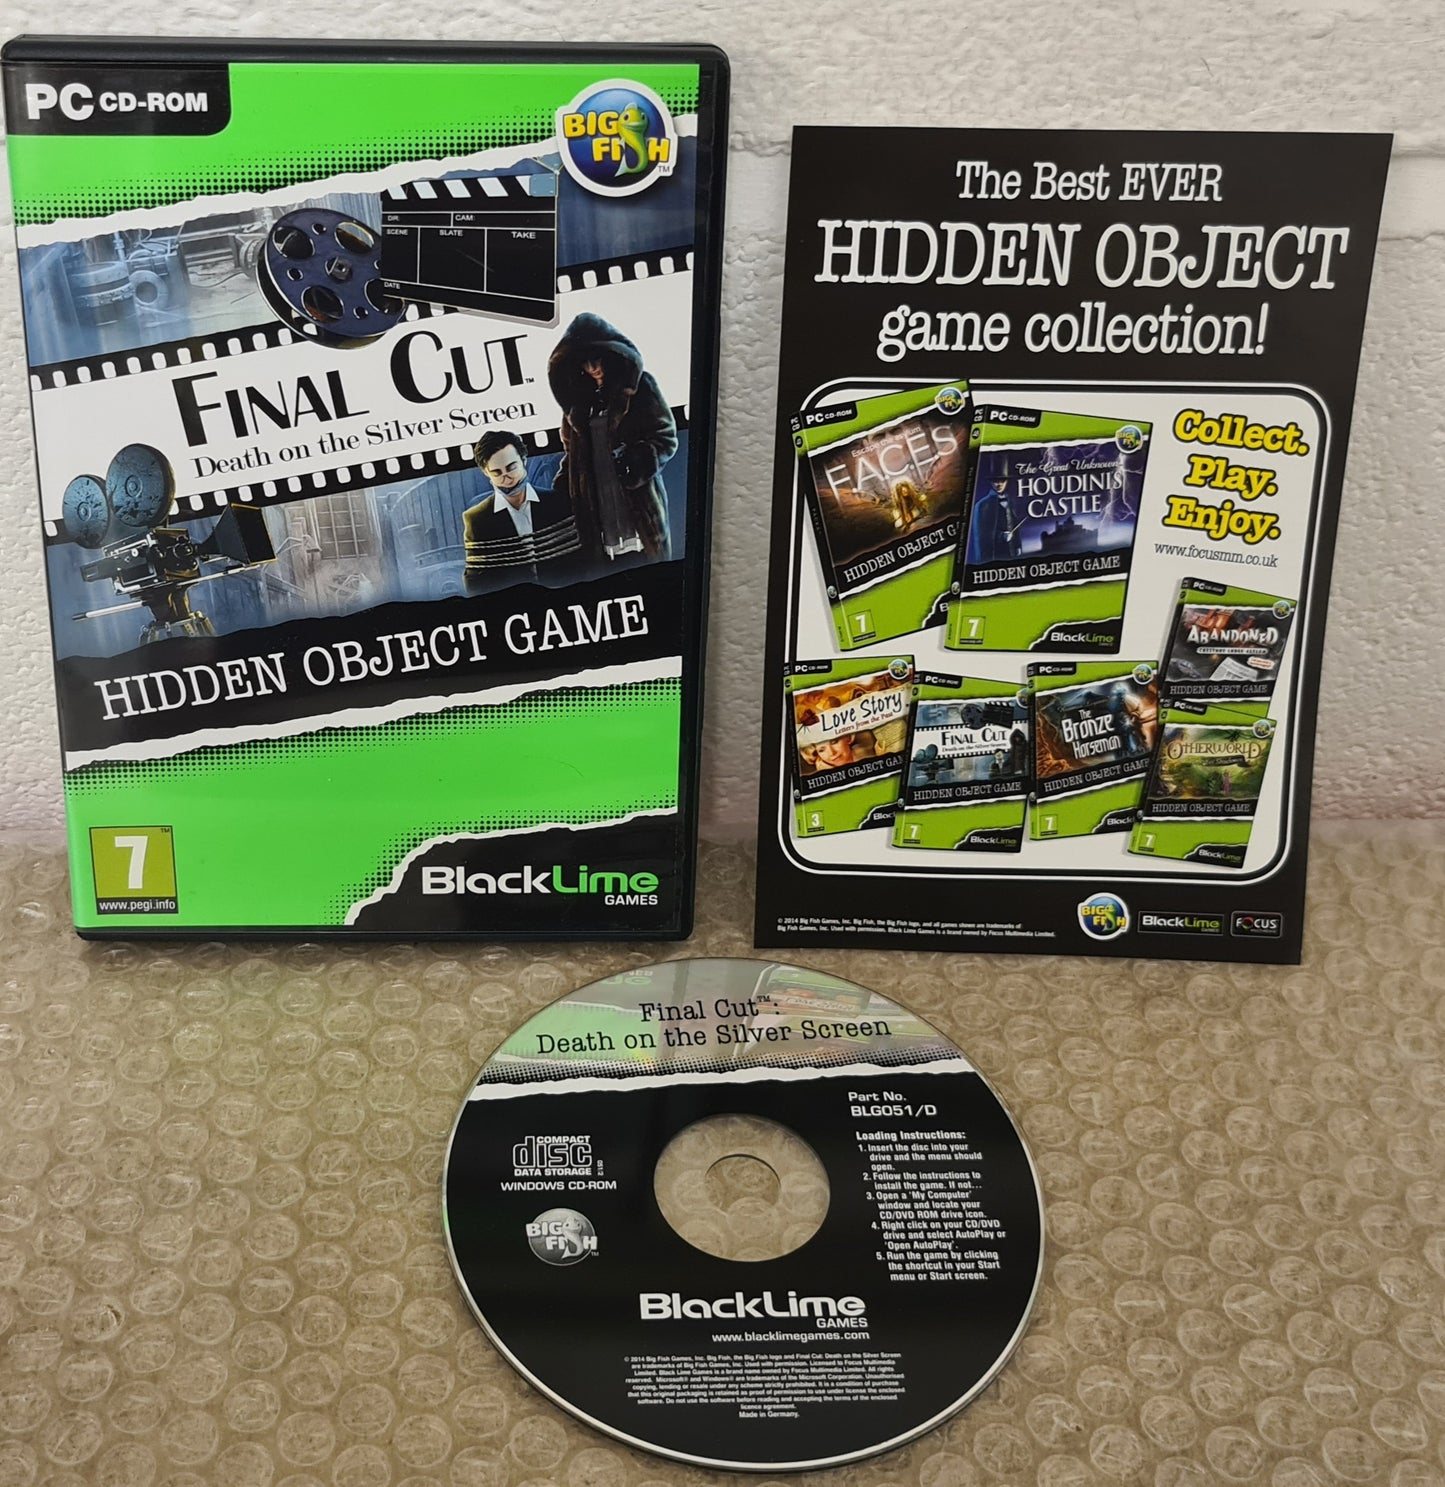 Final Cut Death on the Silver Screen PC Game